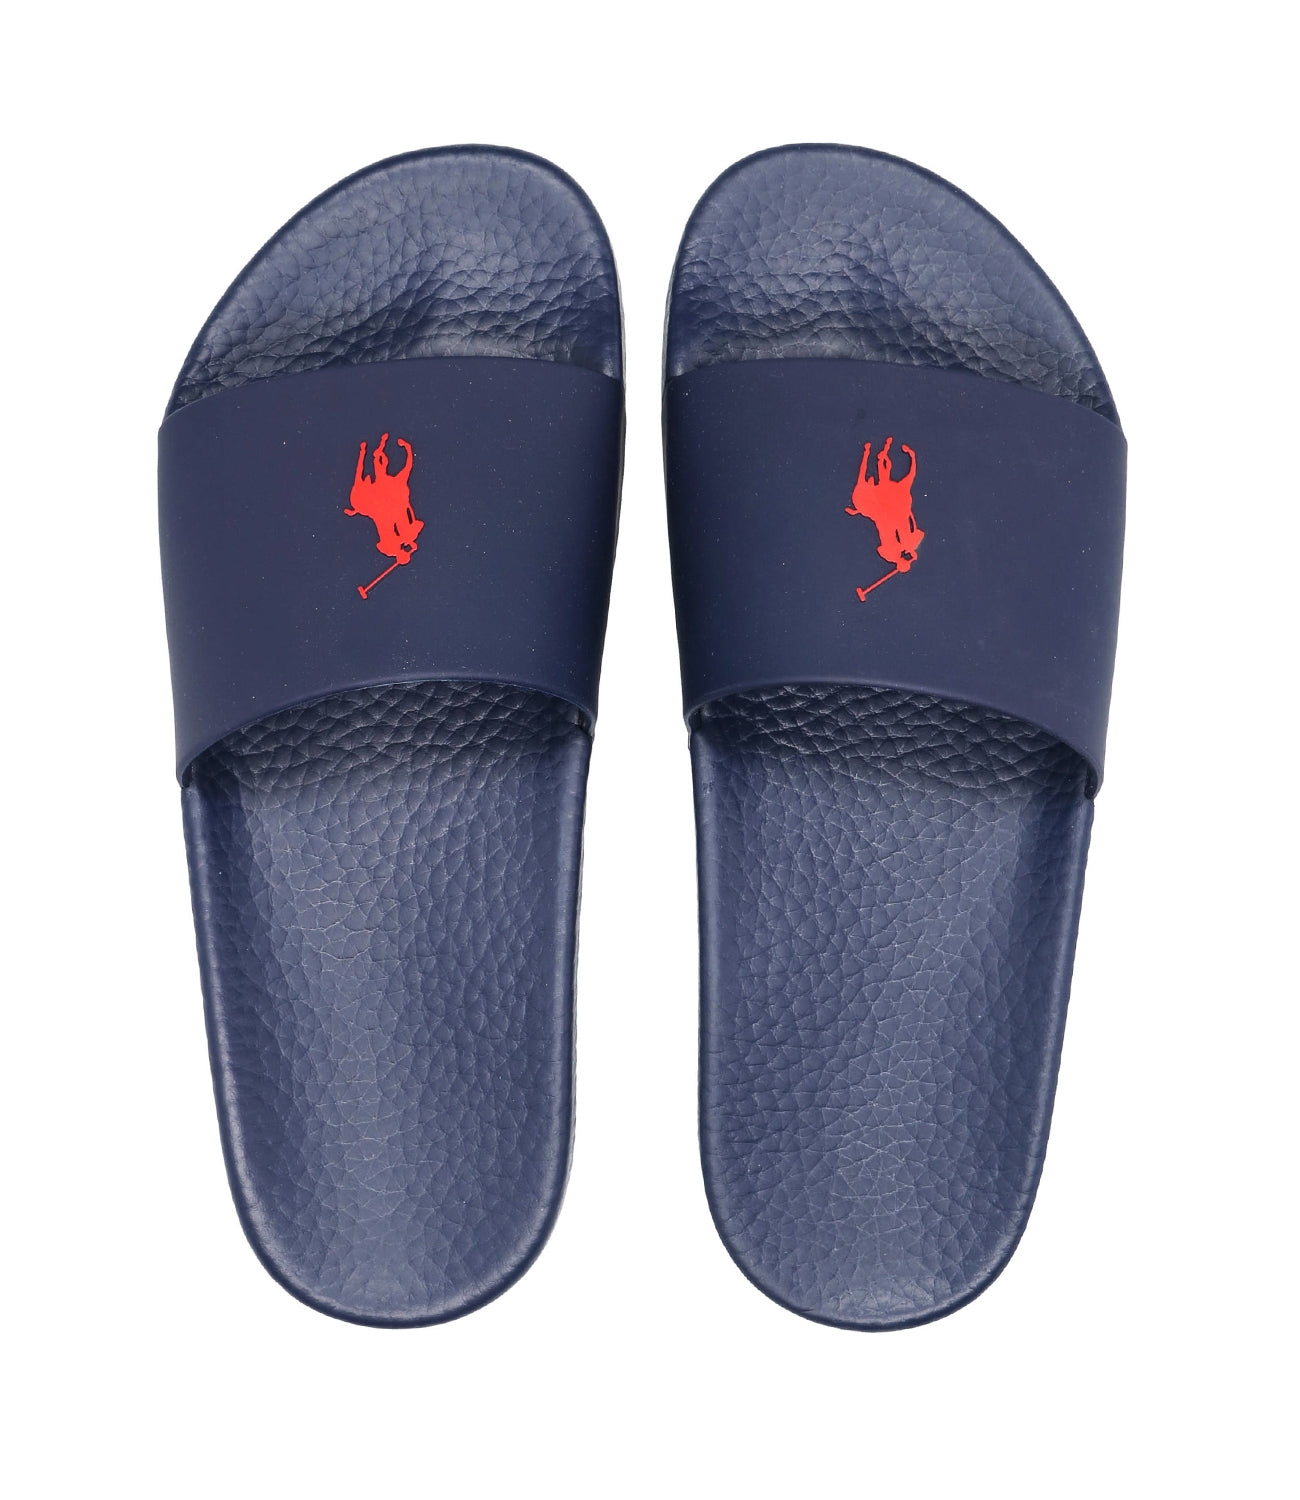 Polo Ralph Lauren | Navy Blue and Red Slipper